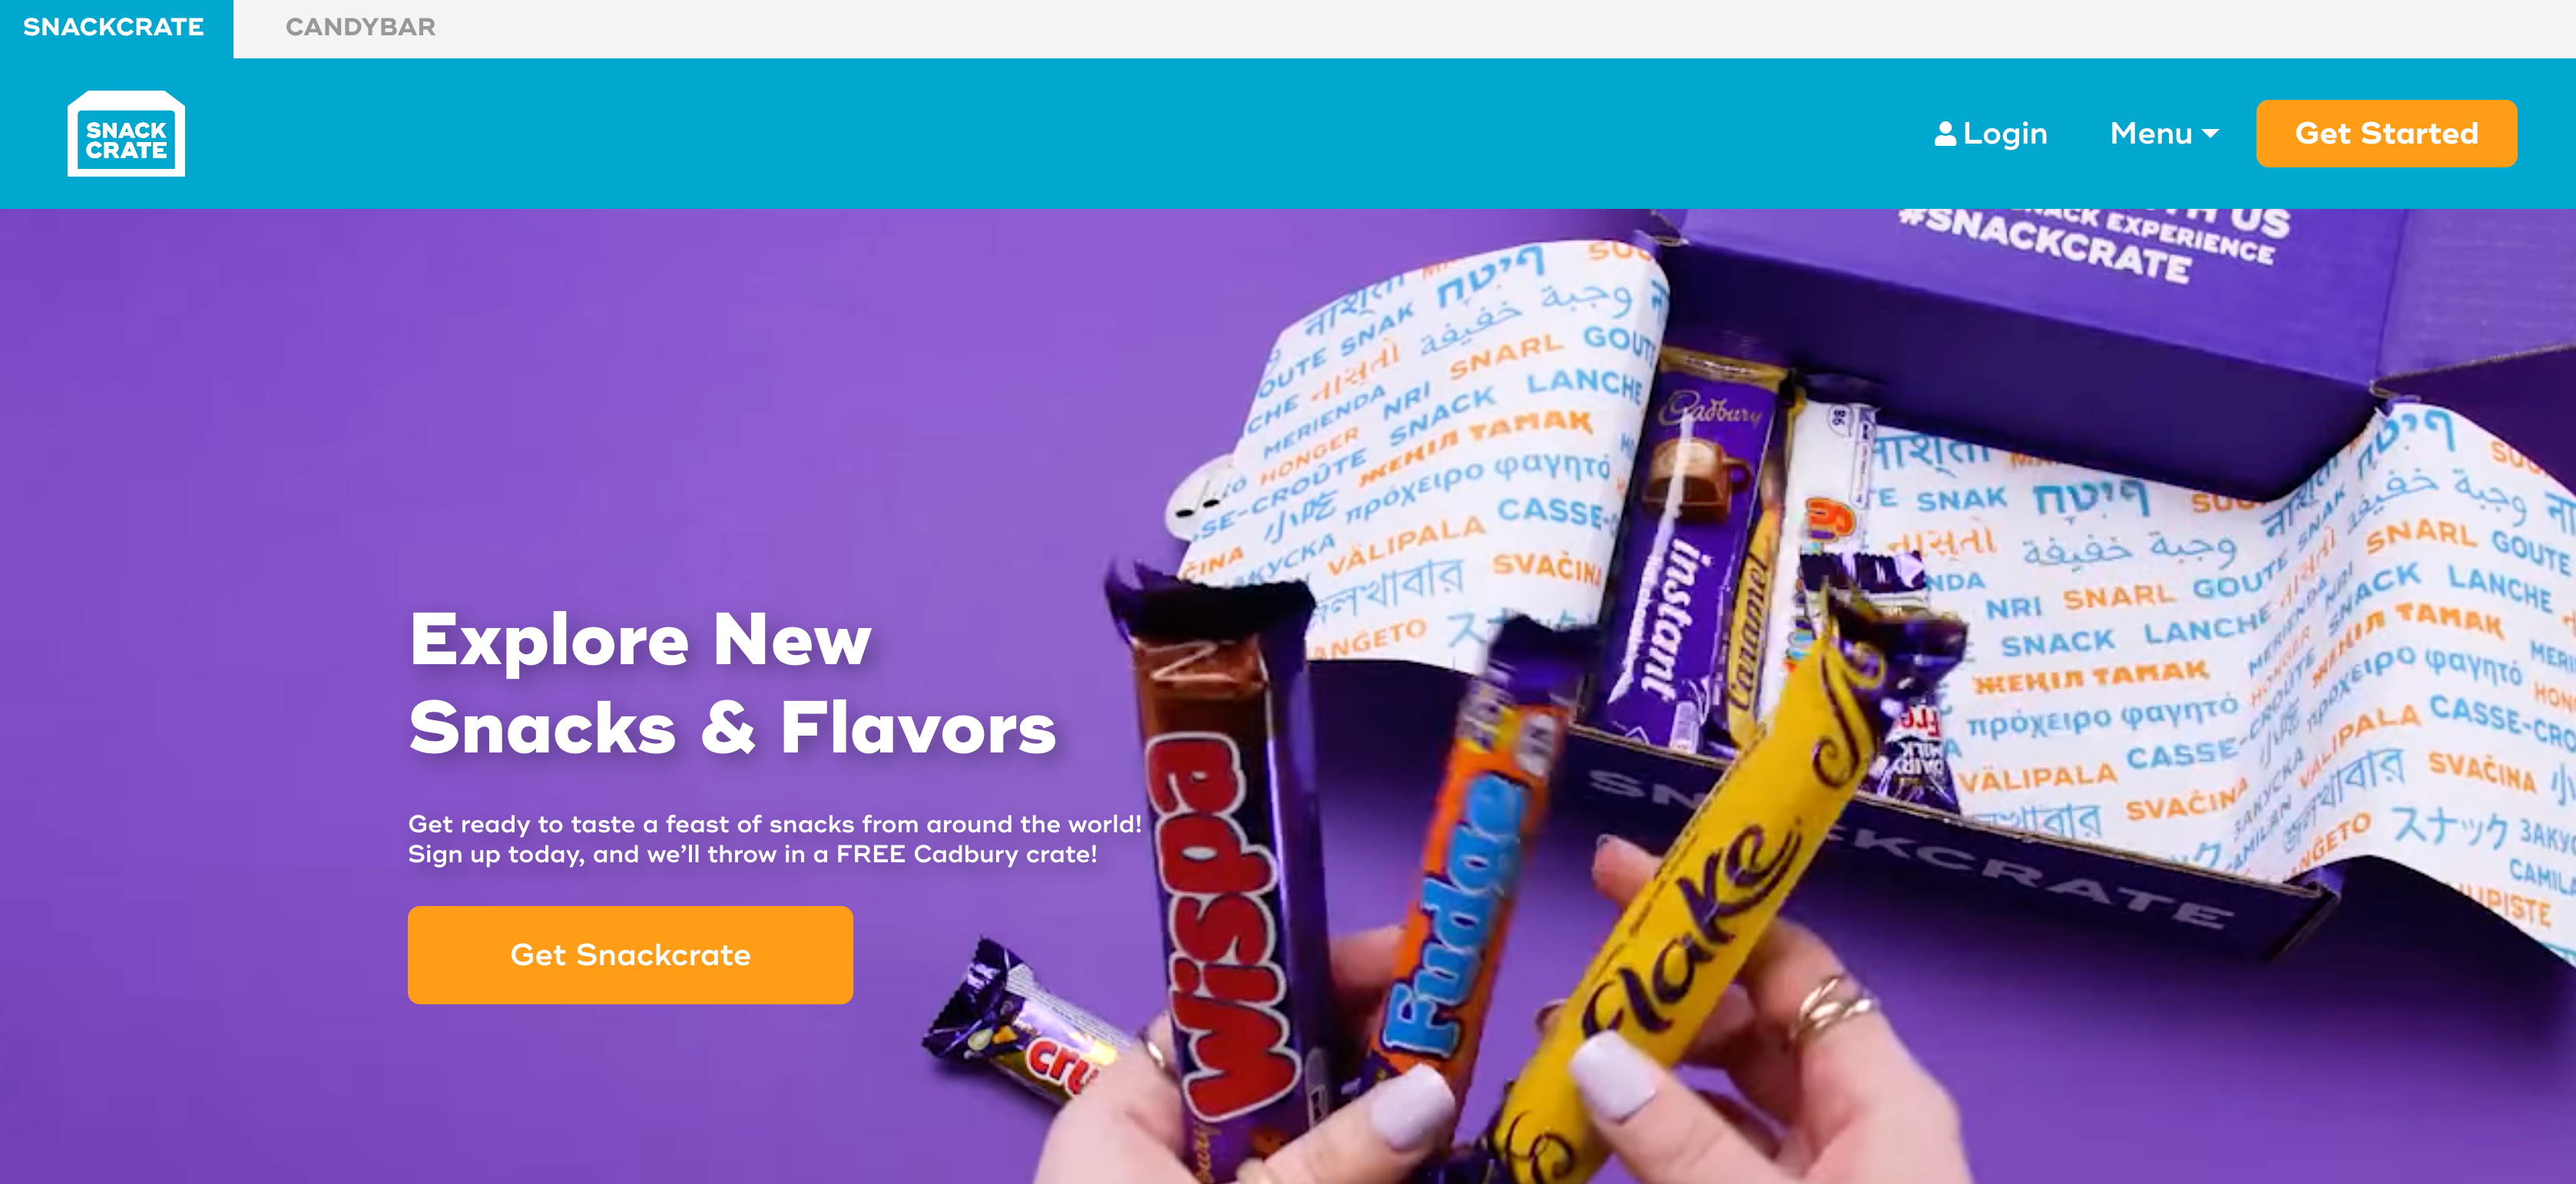 WooCommerce Subscription Box Example from SnackCrate